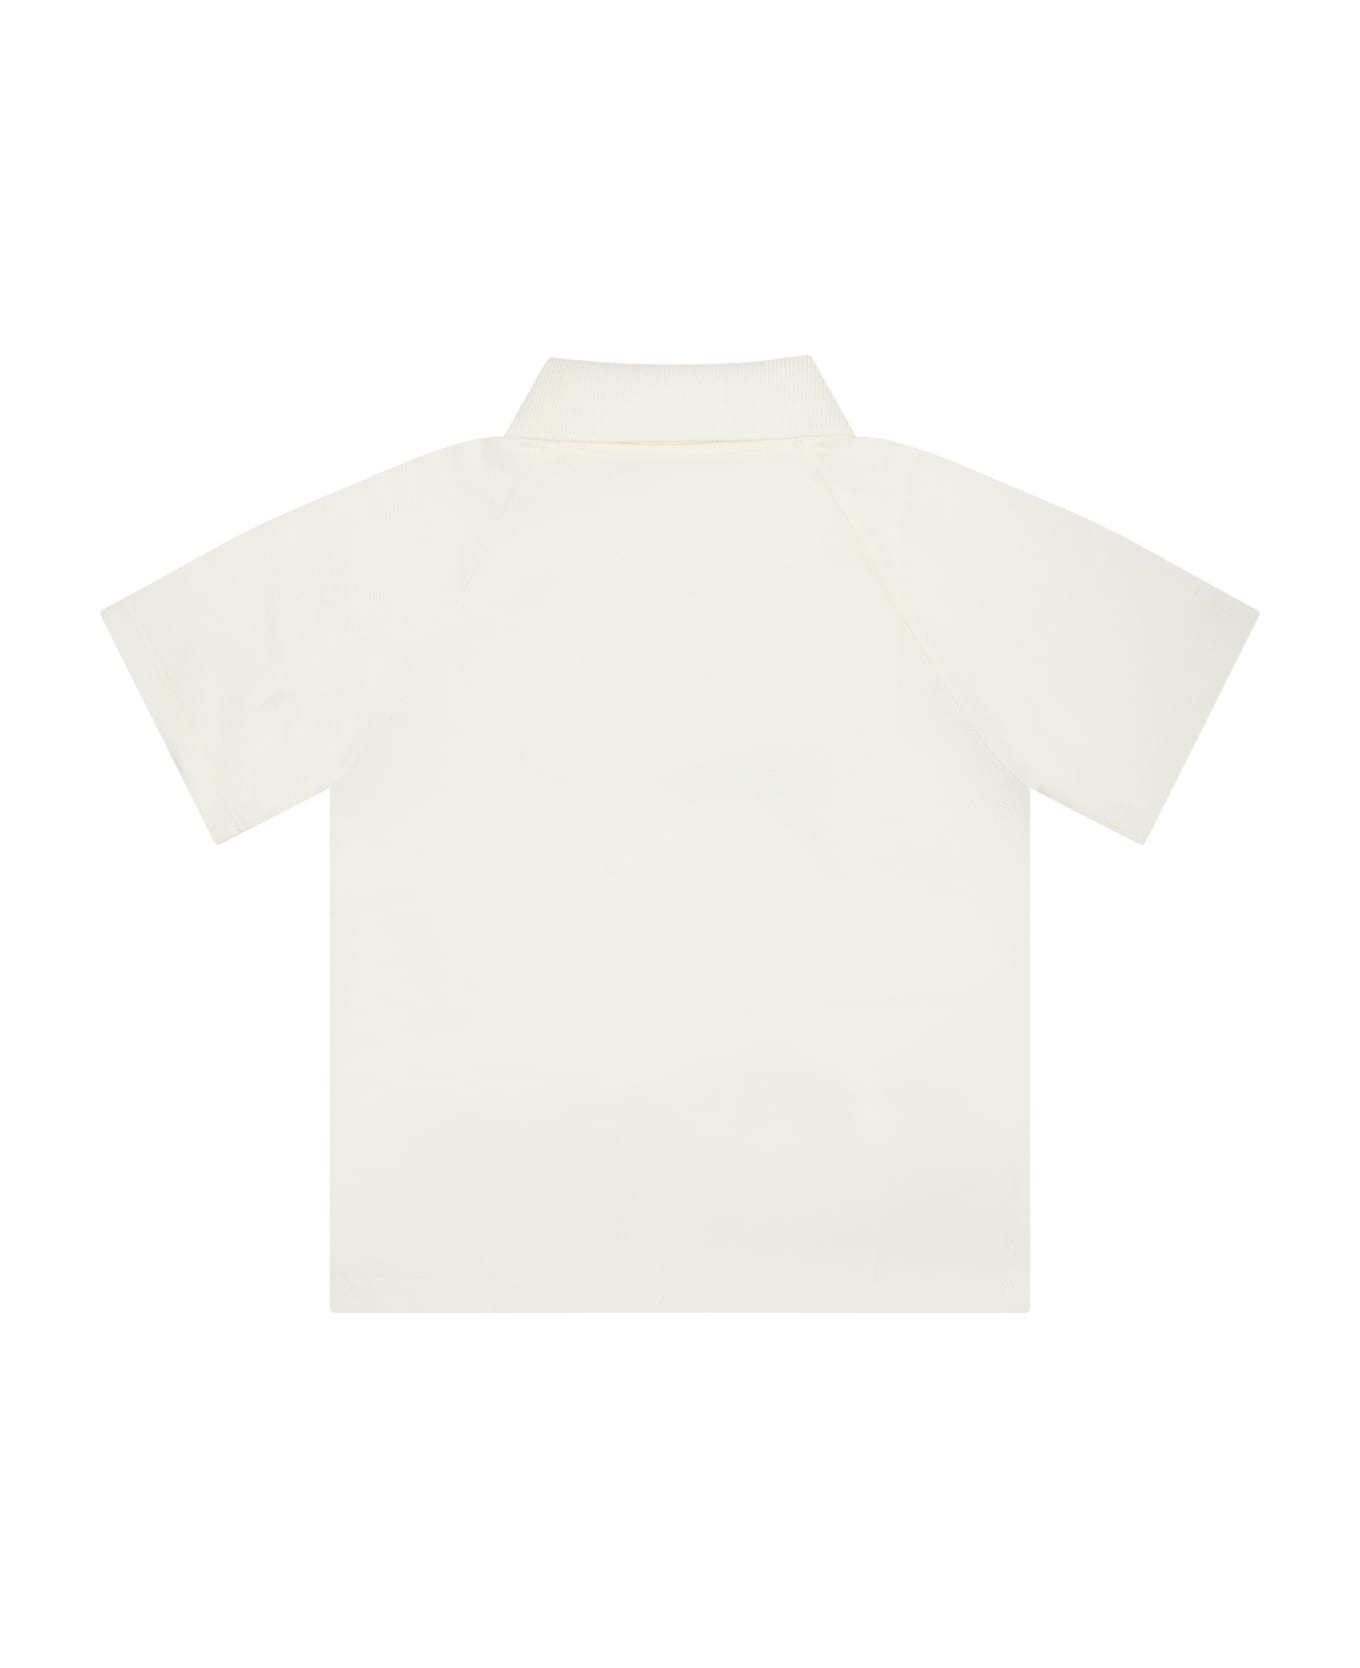 Gucci White Polo Shirt For Babies With Web Detail And Logo - White